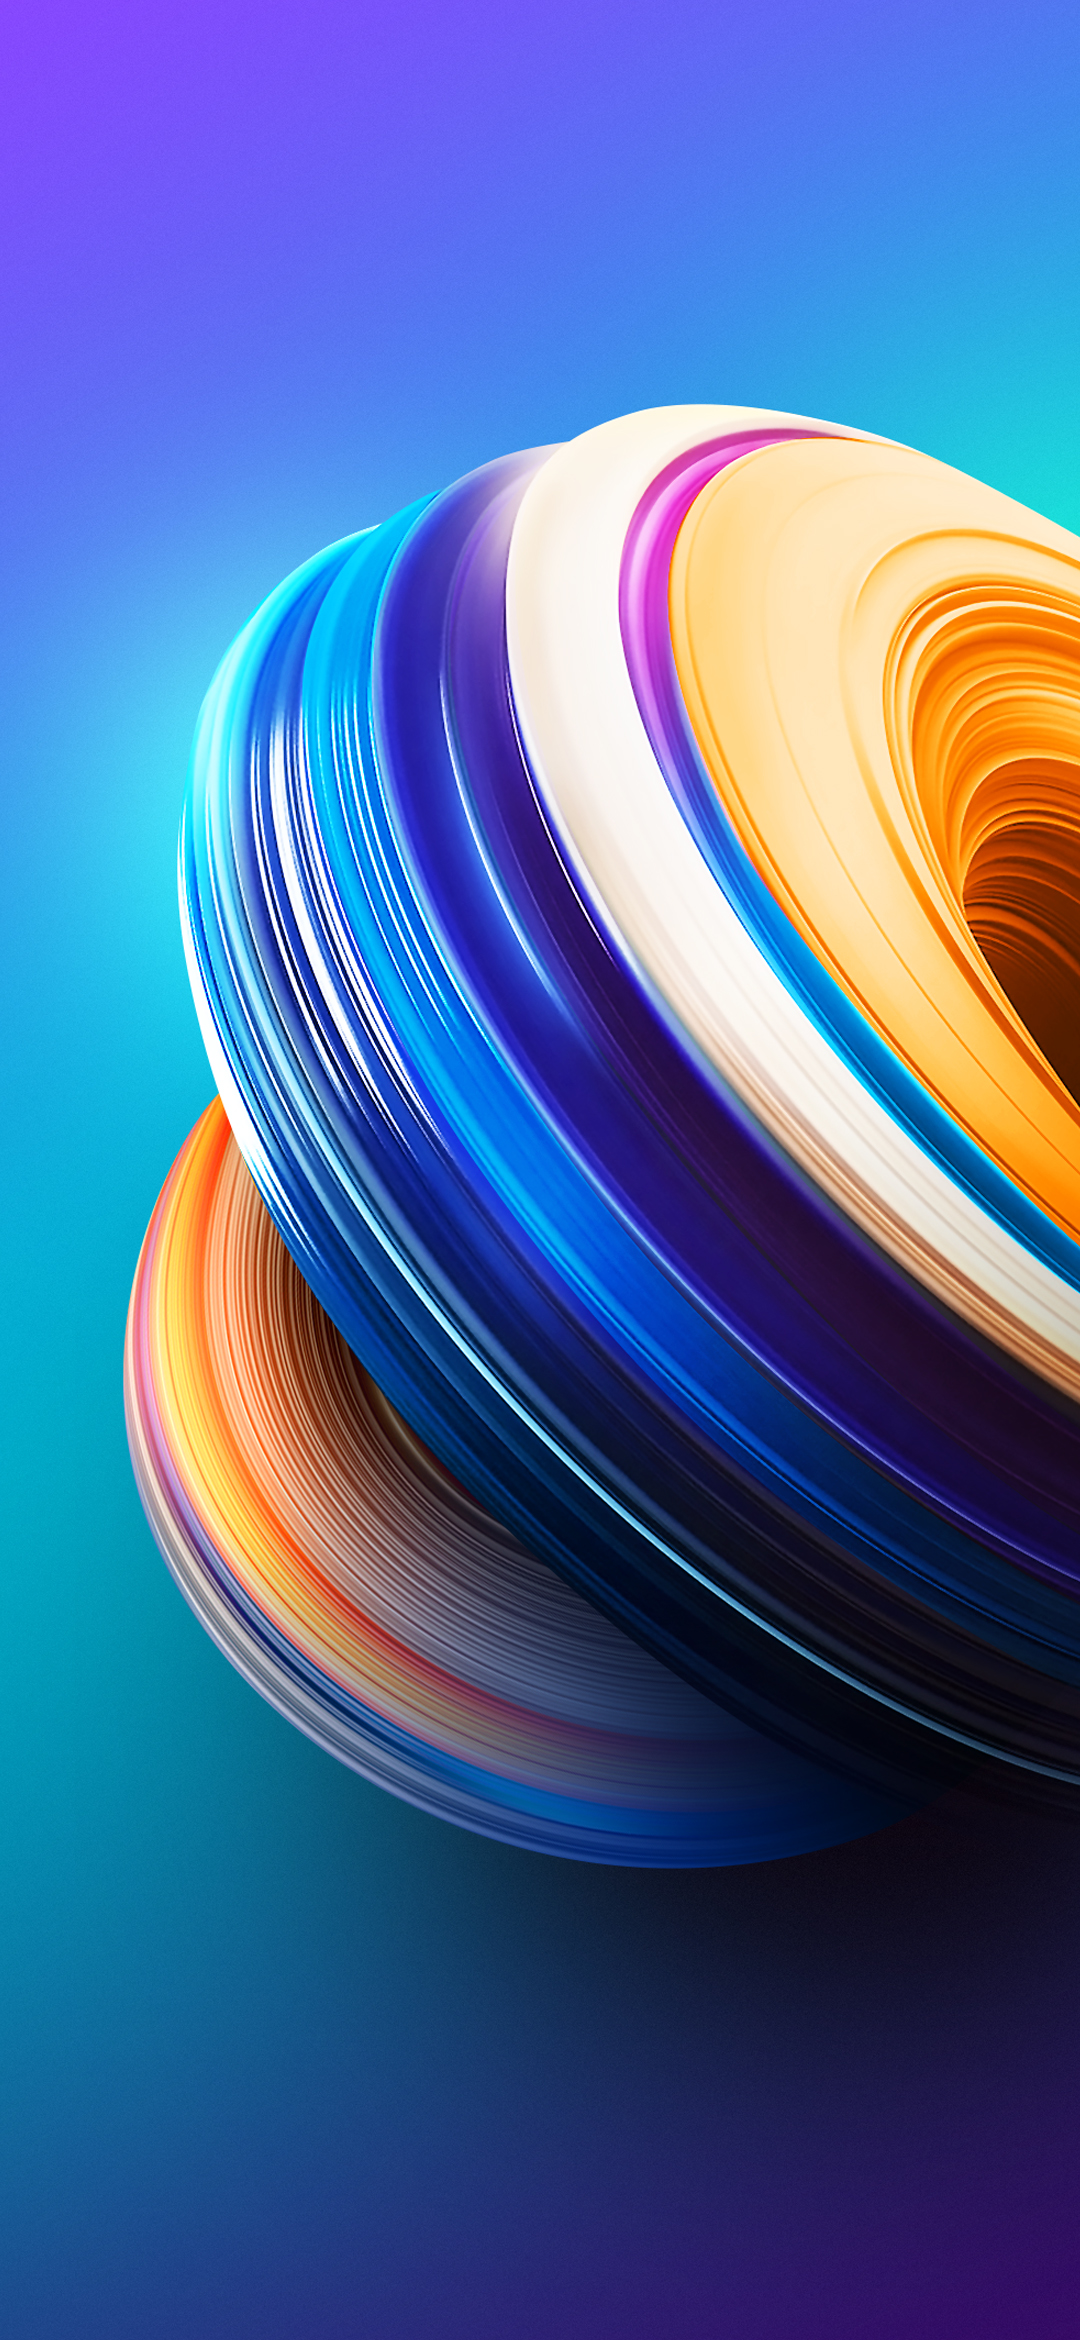 Huawei P Smart+ or nova 3i Wallpapers with Abstract Colorful